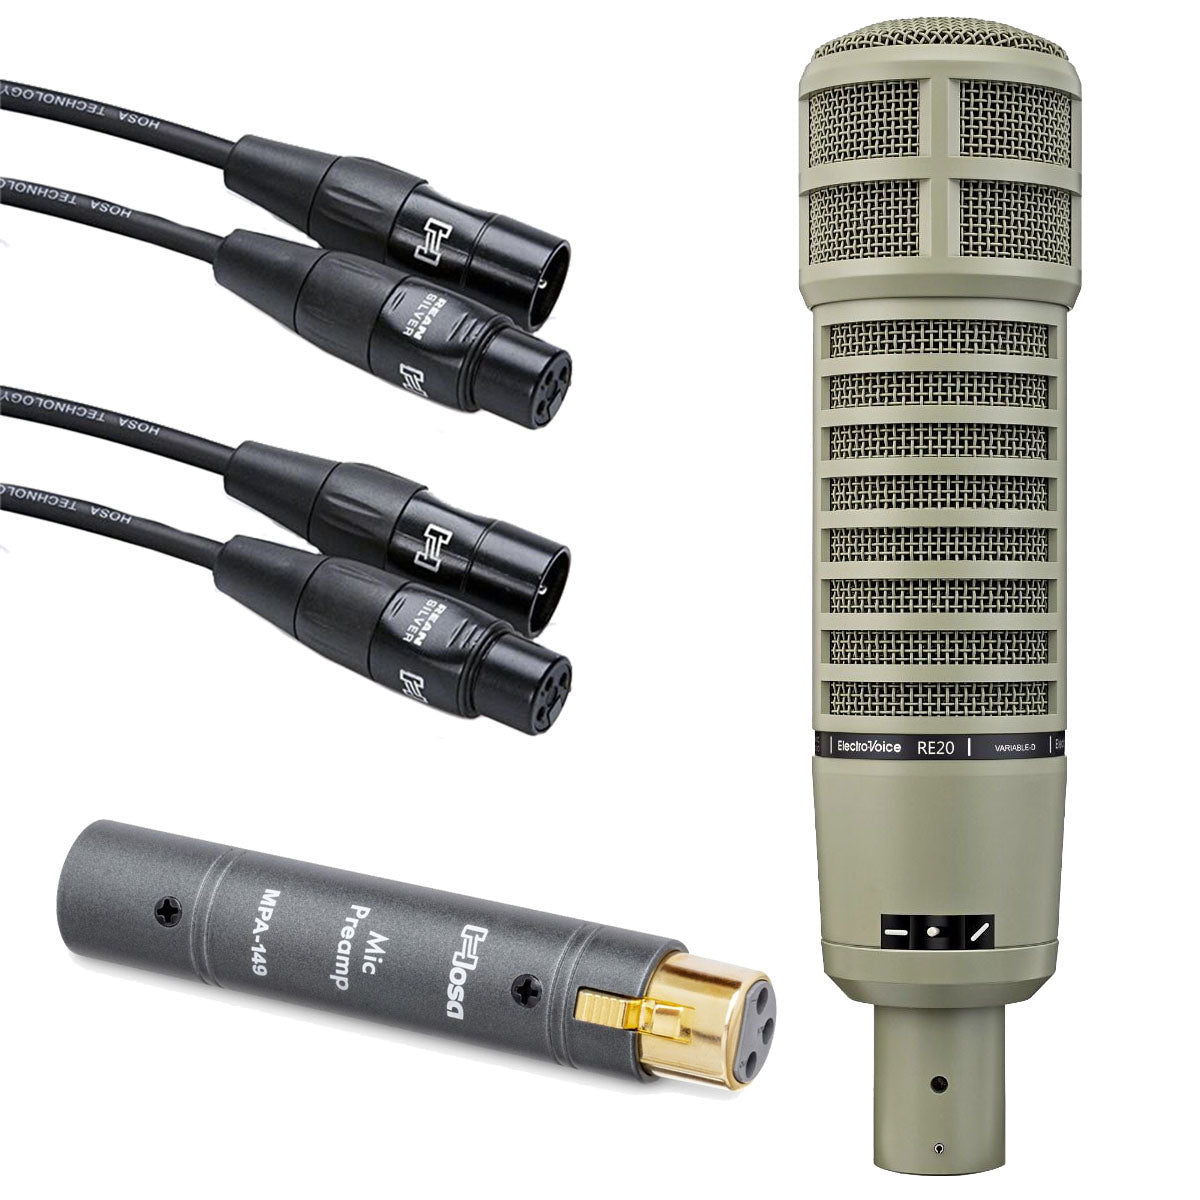 Collage image of the Electro-Voice RE20 Large-Diaphragm Dynamic Microphone PREAMP PAK